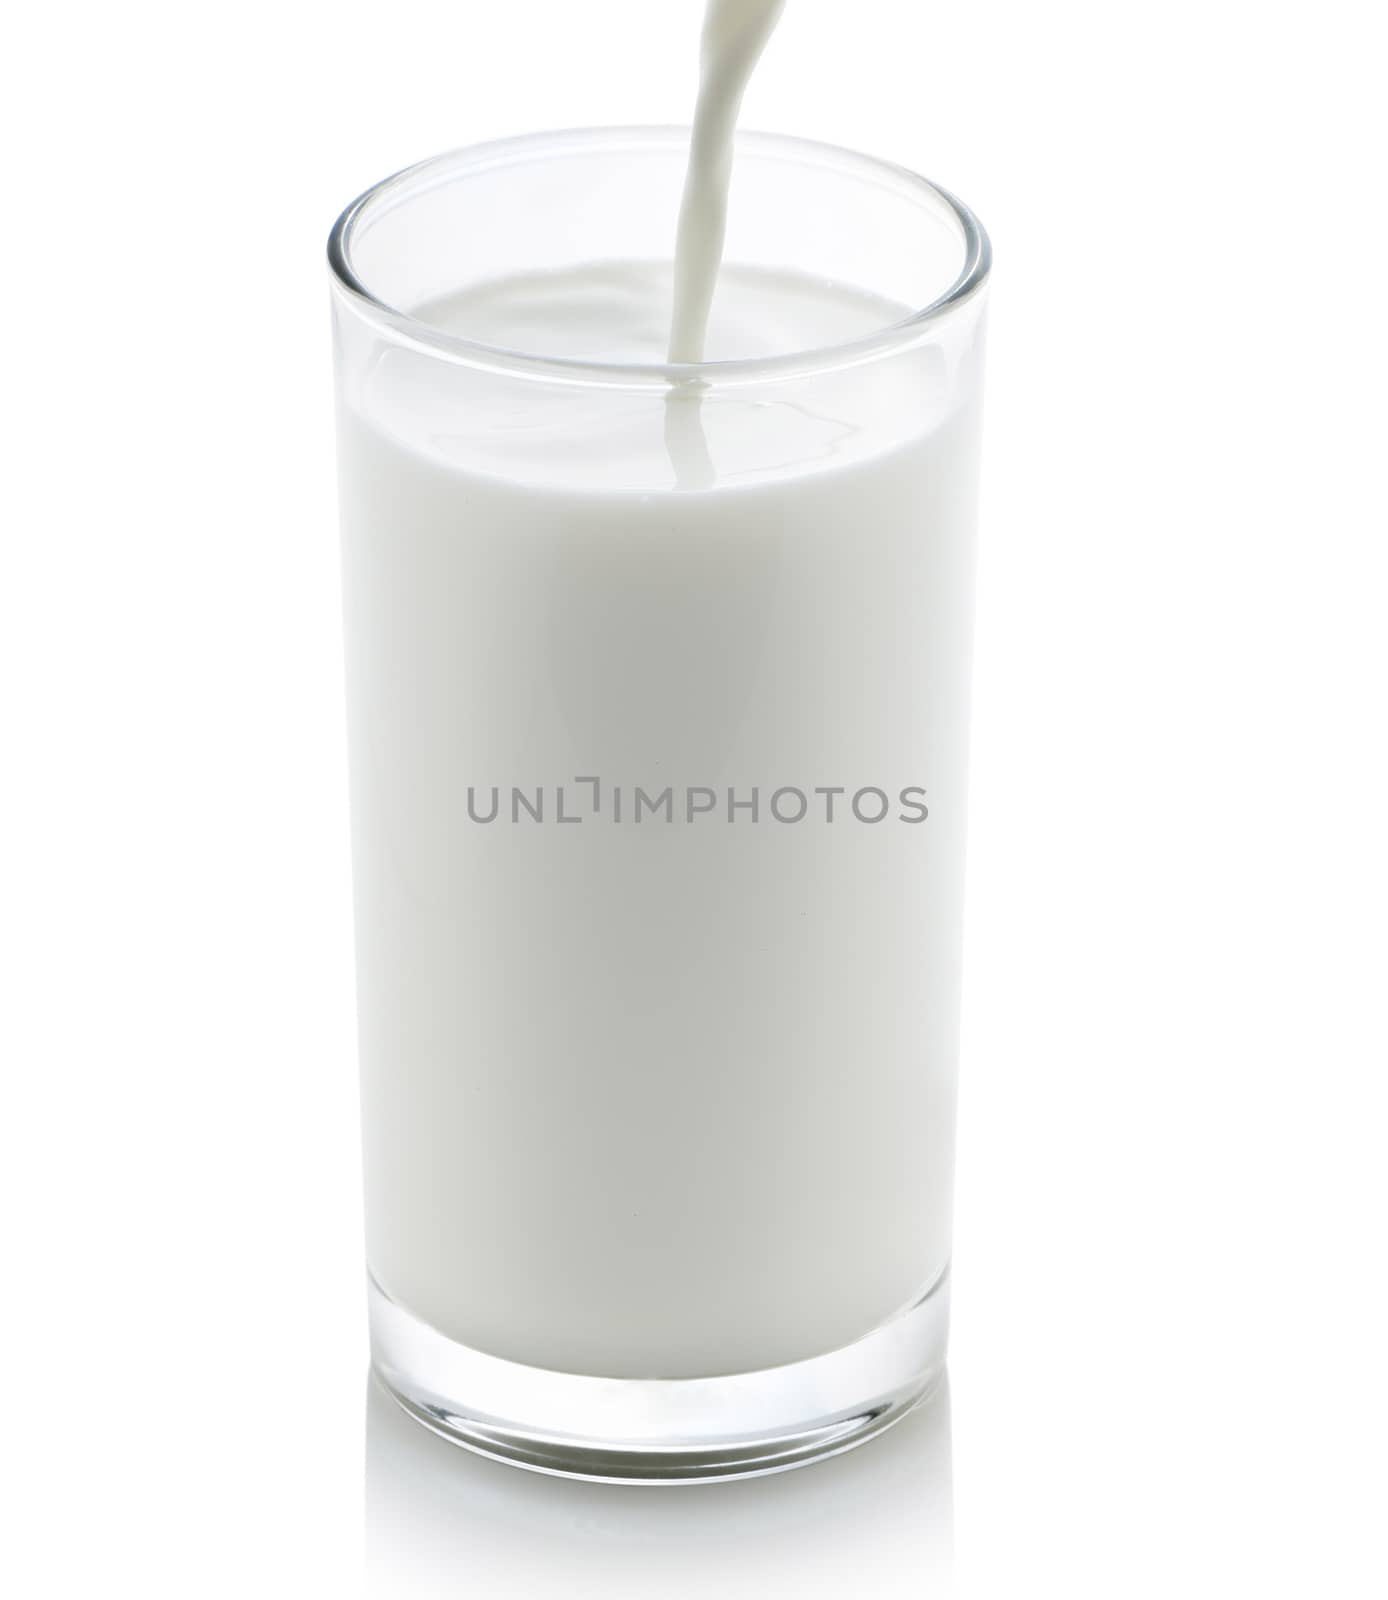 Milk pouring from a jug into a glass on white background